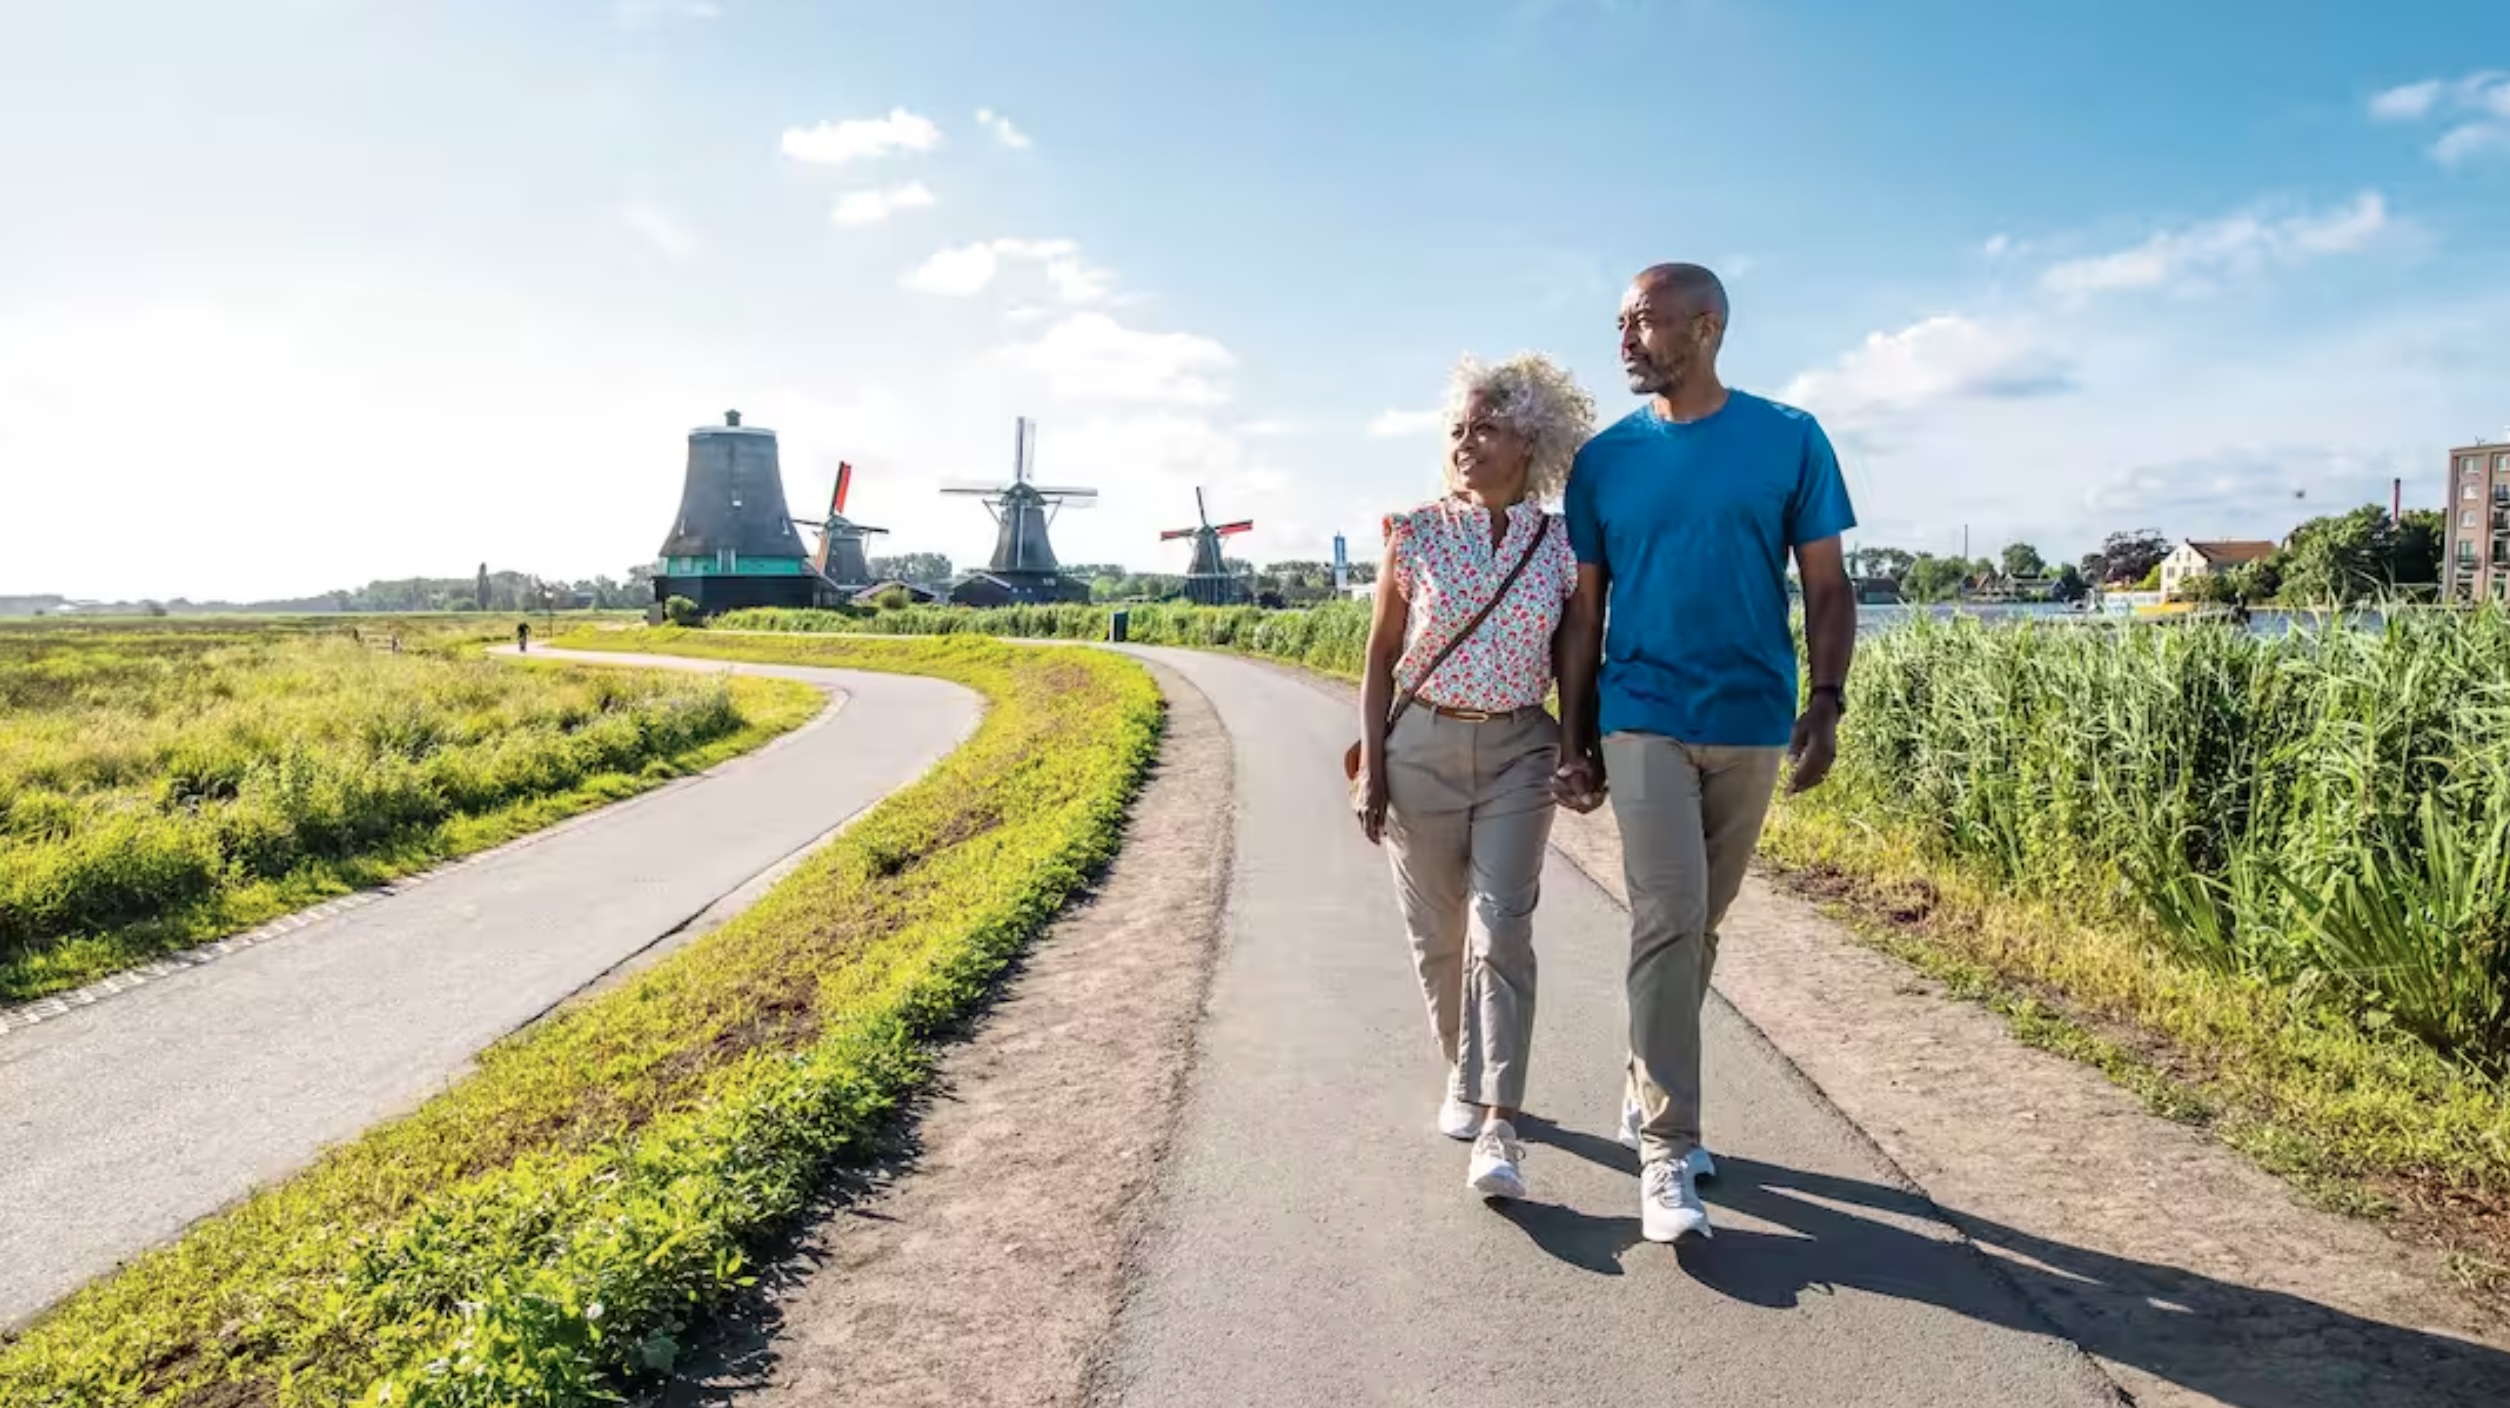 Couple walking with Windmills in the background near Amsterdam